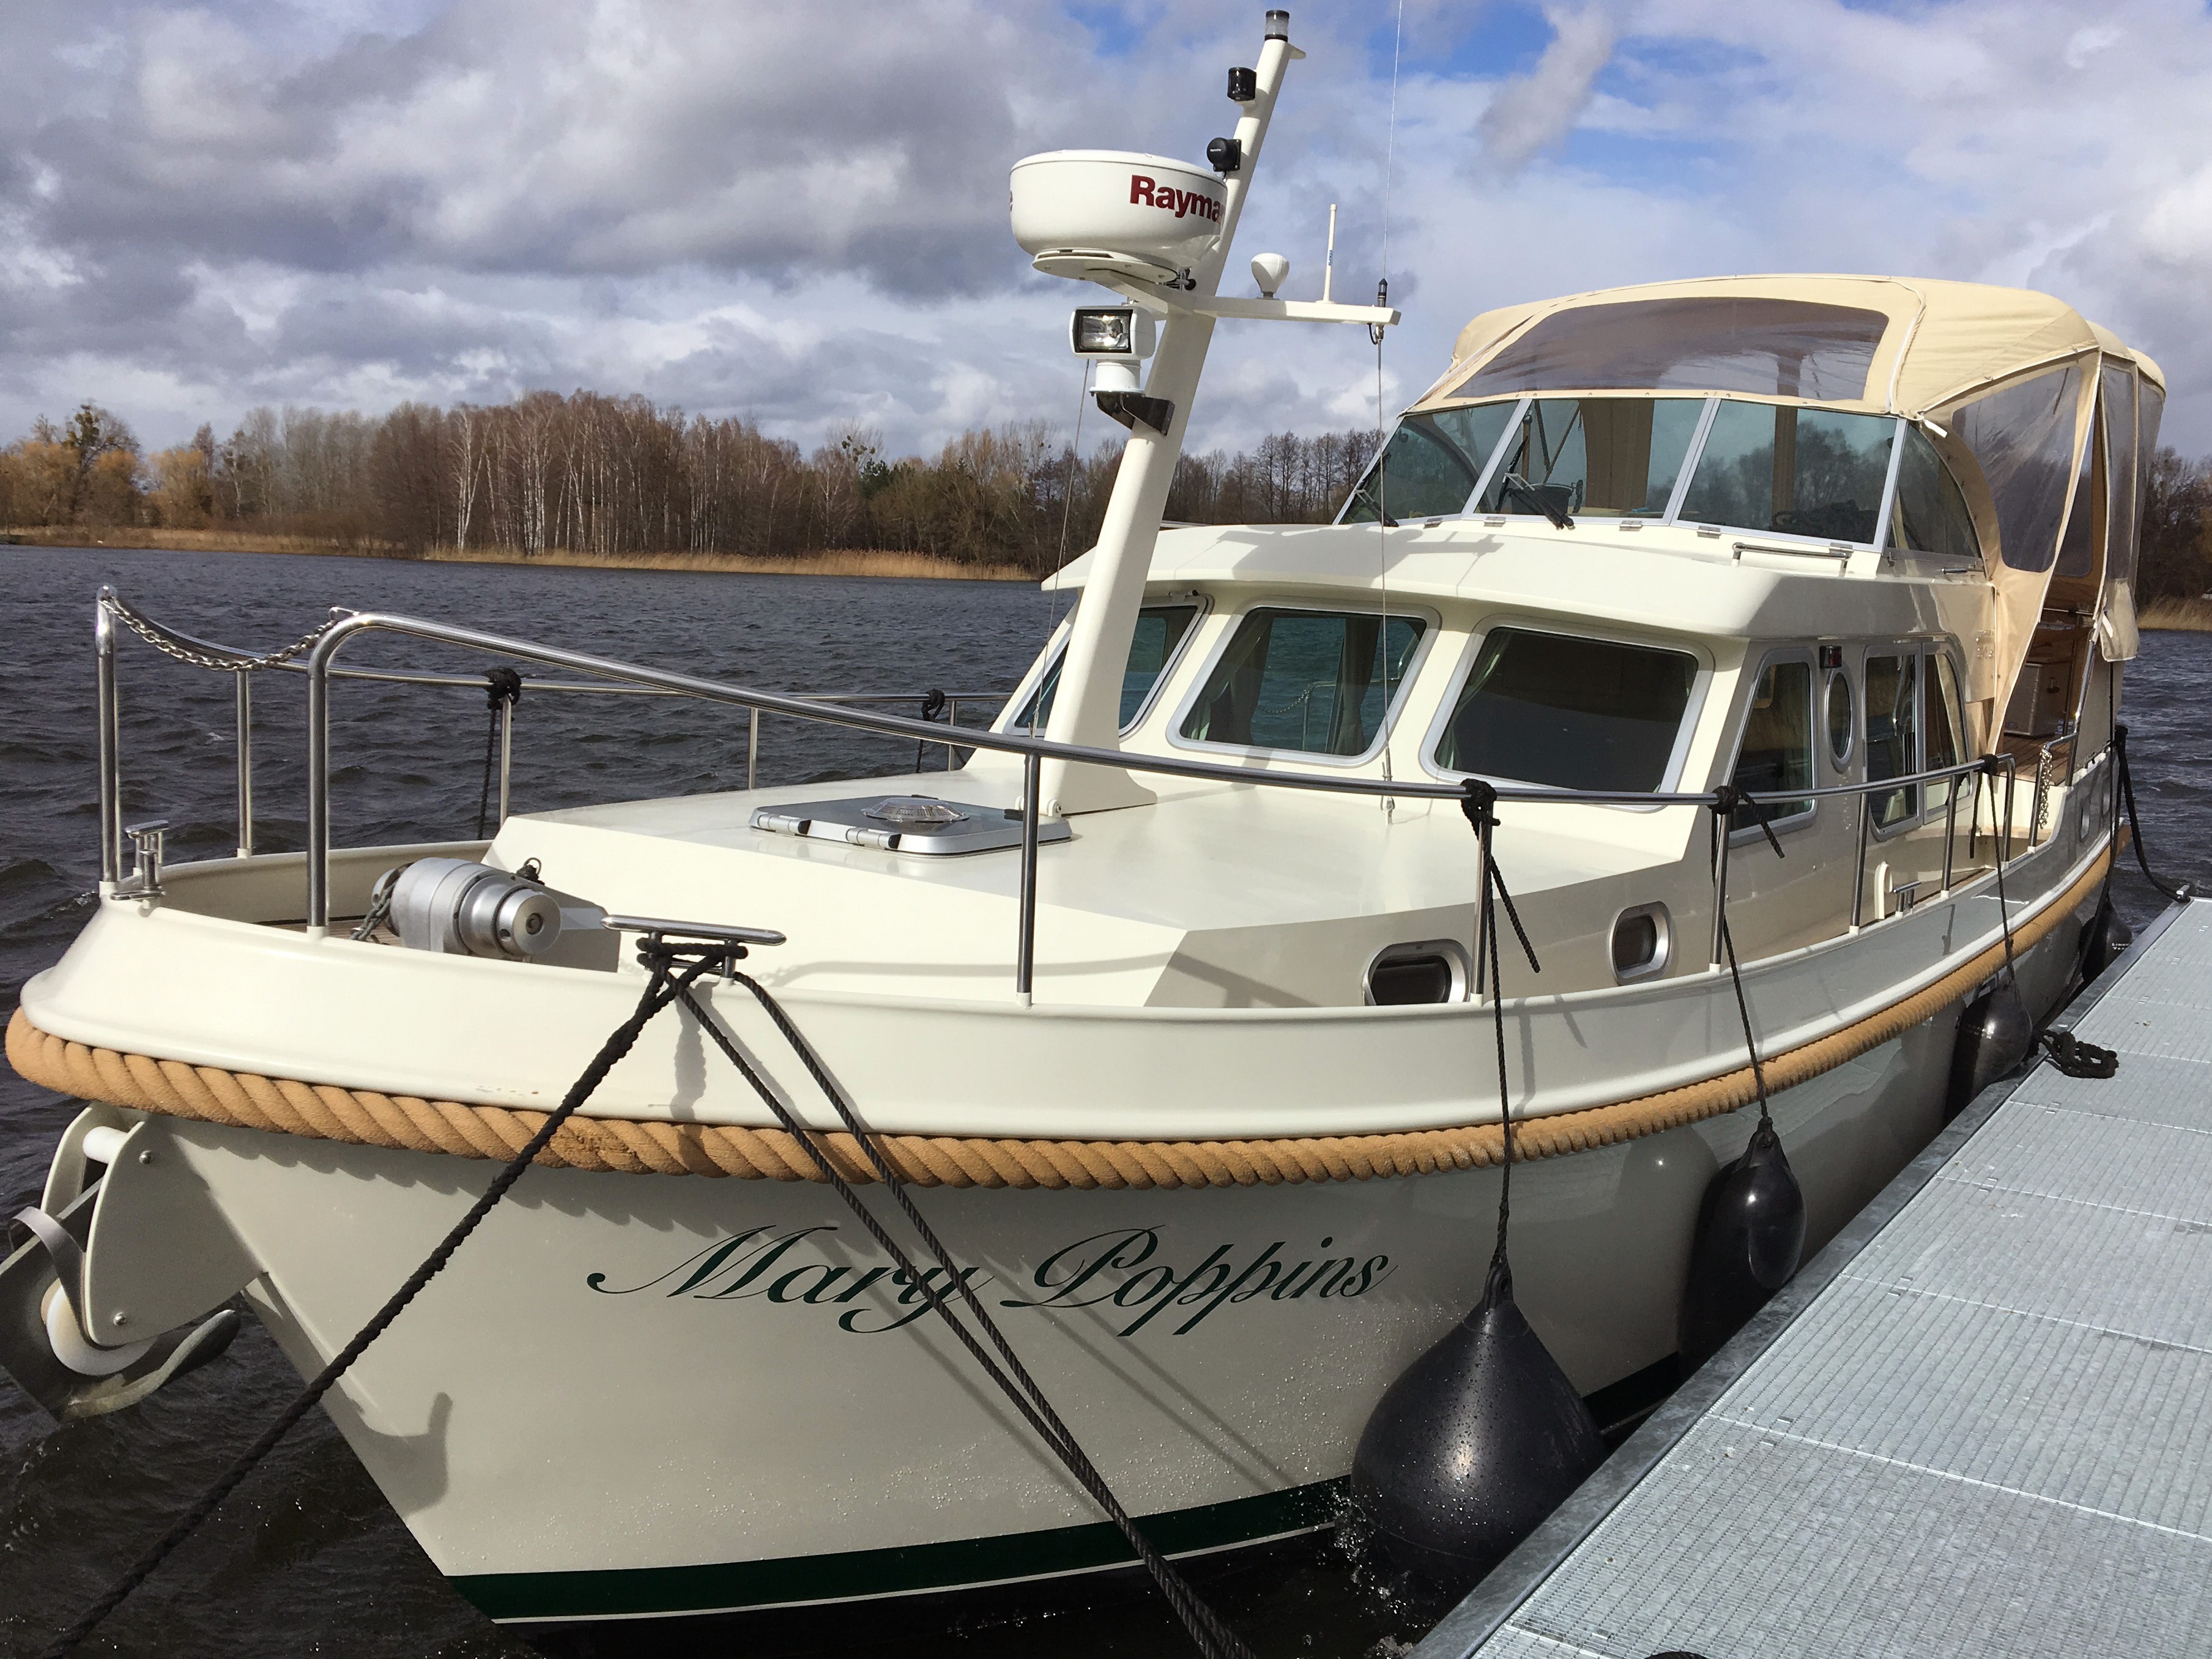 Linssen Grand Sturdy 34.9 AC - Yacht Charter Germany & Boat hire in Germany Werder (Havel) Marina Vulkan Werft 2